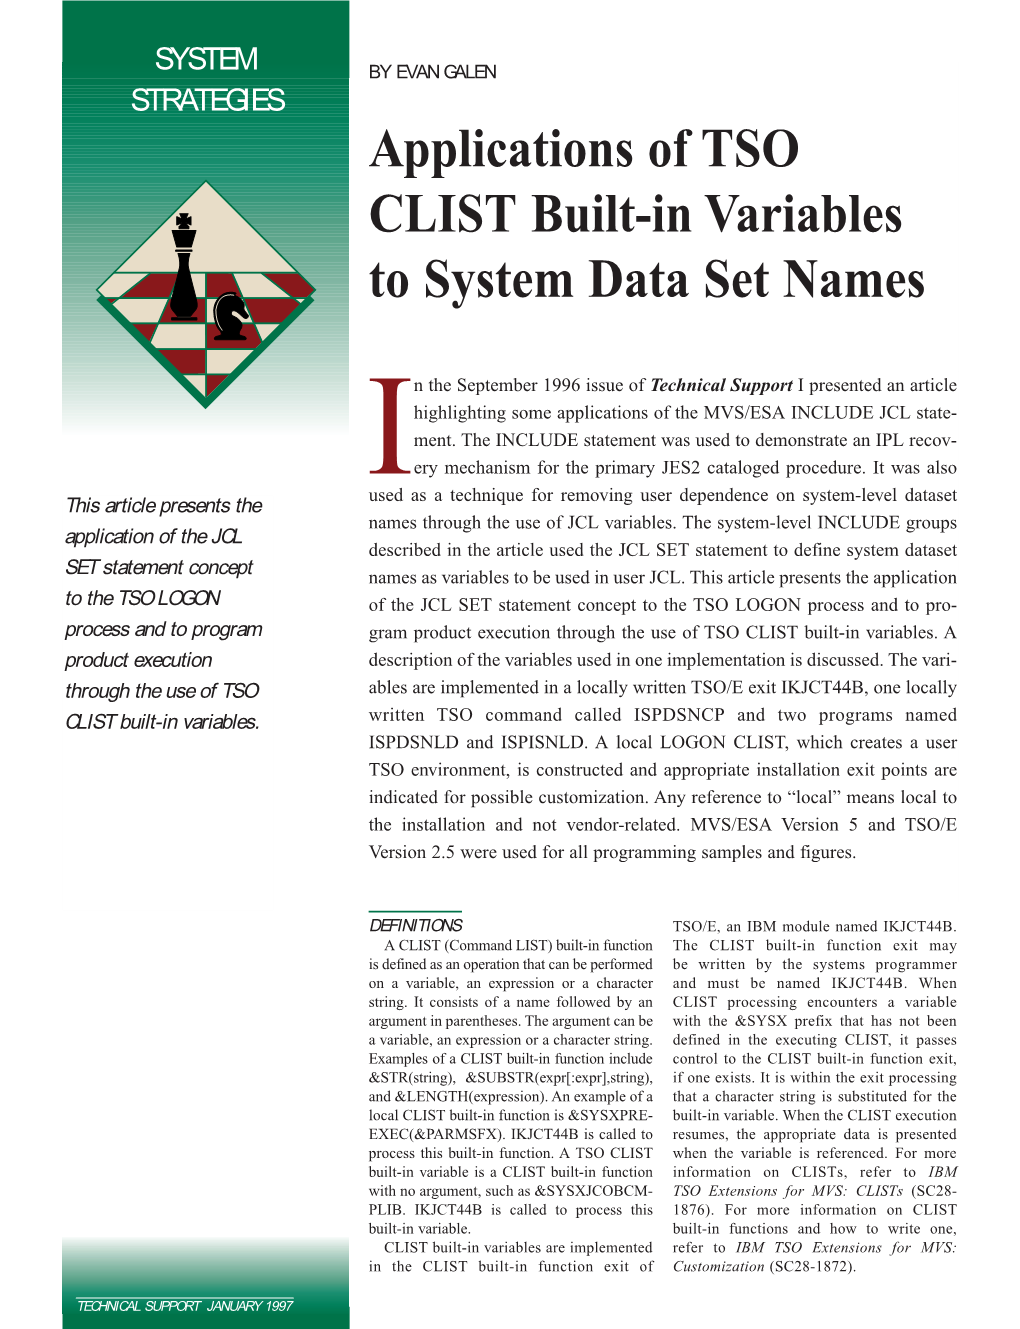 Applications of TSO CLIST Built-In Variables to System Data Set Names